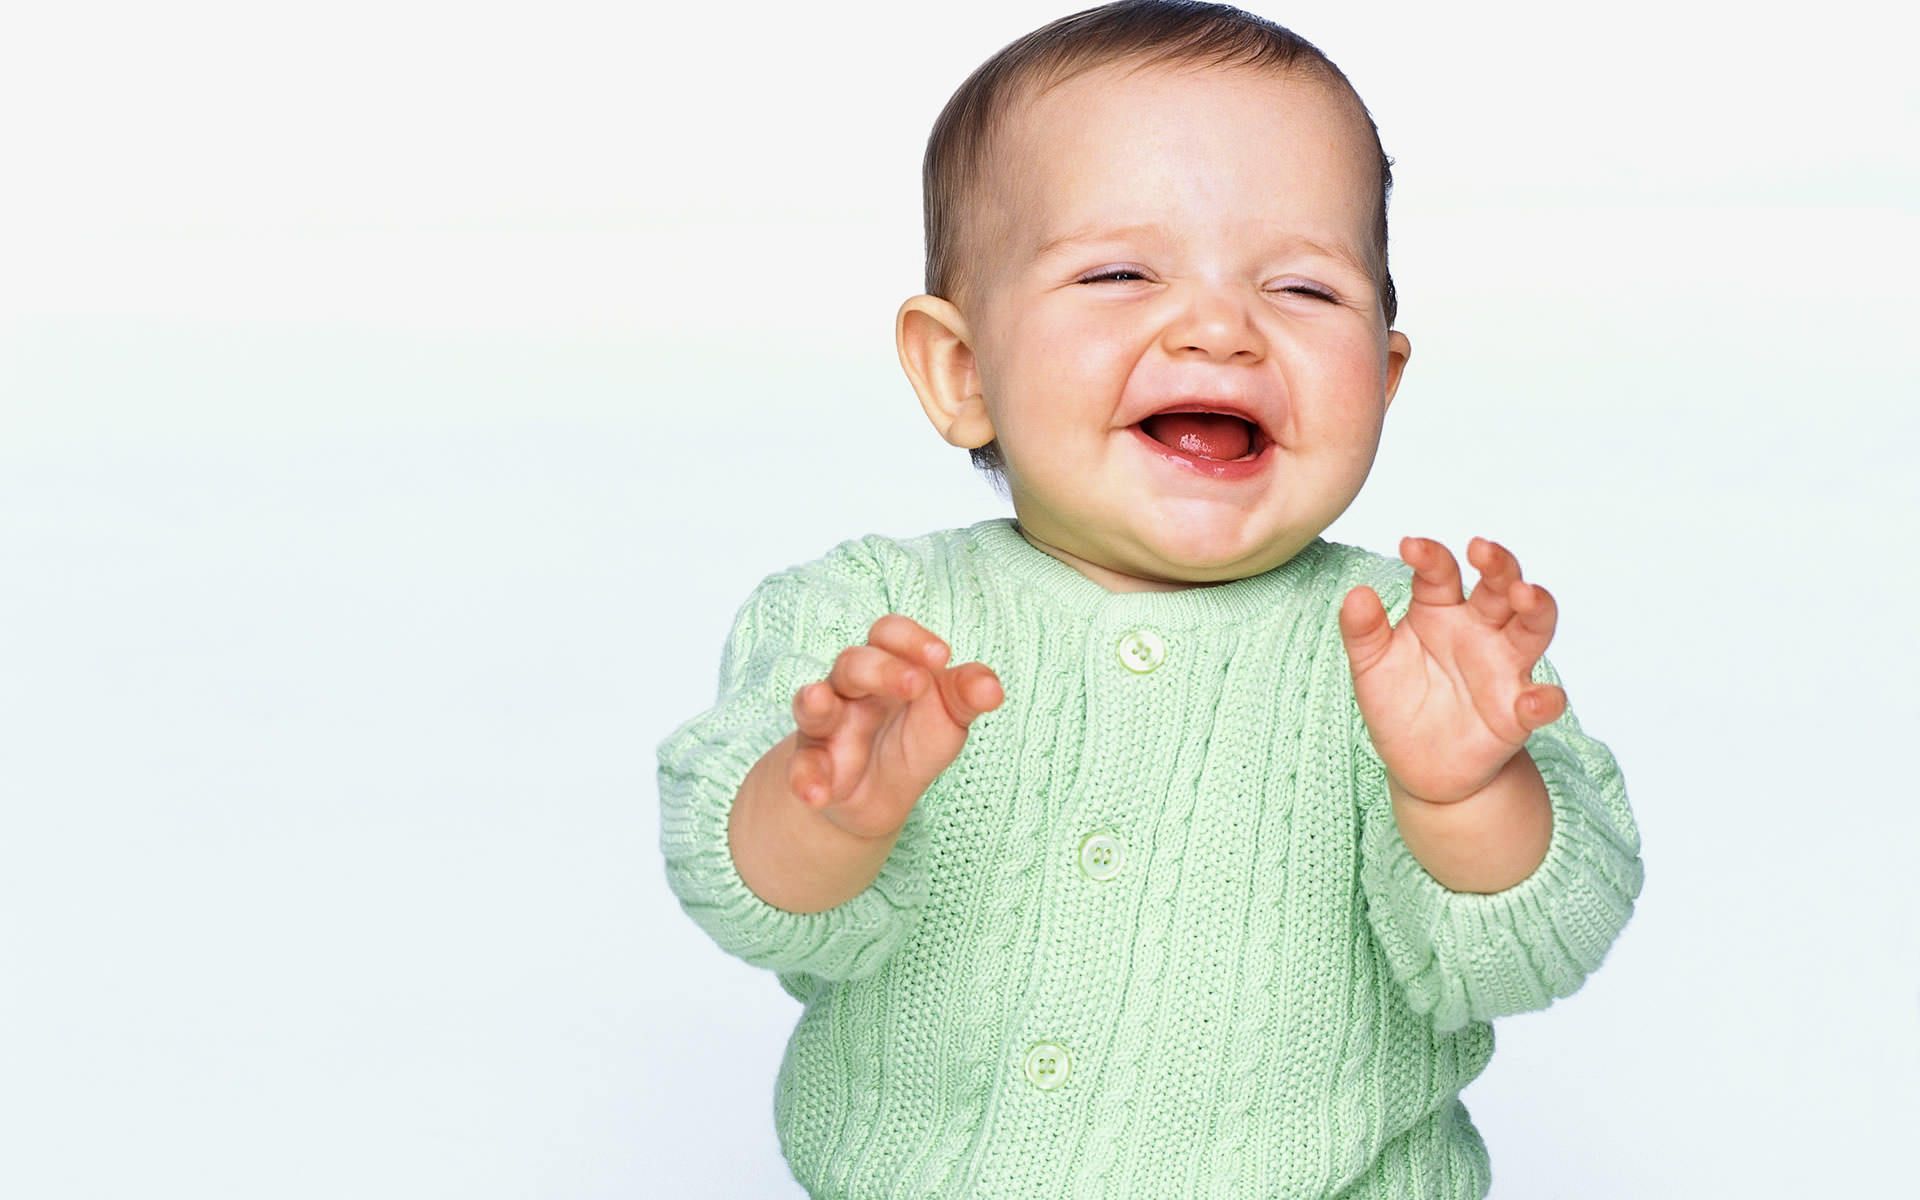 Laughing Baby Background 1920x1200